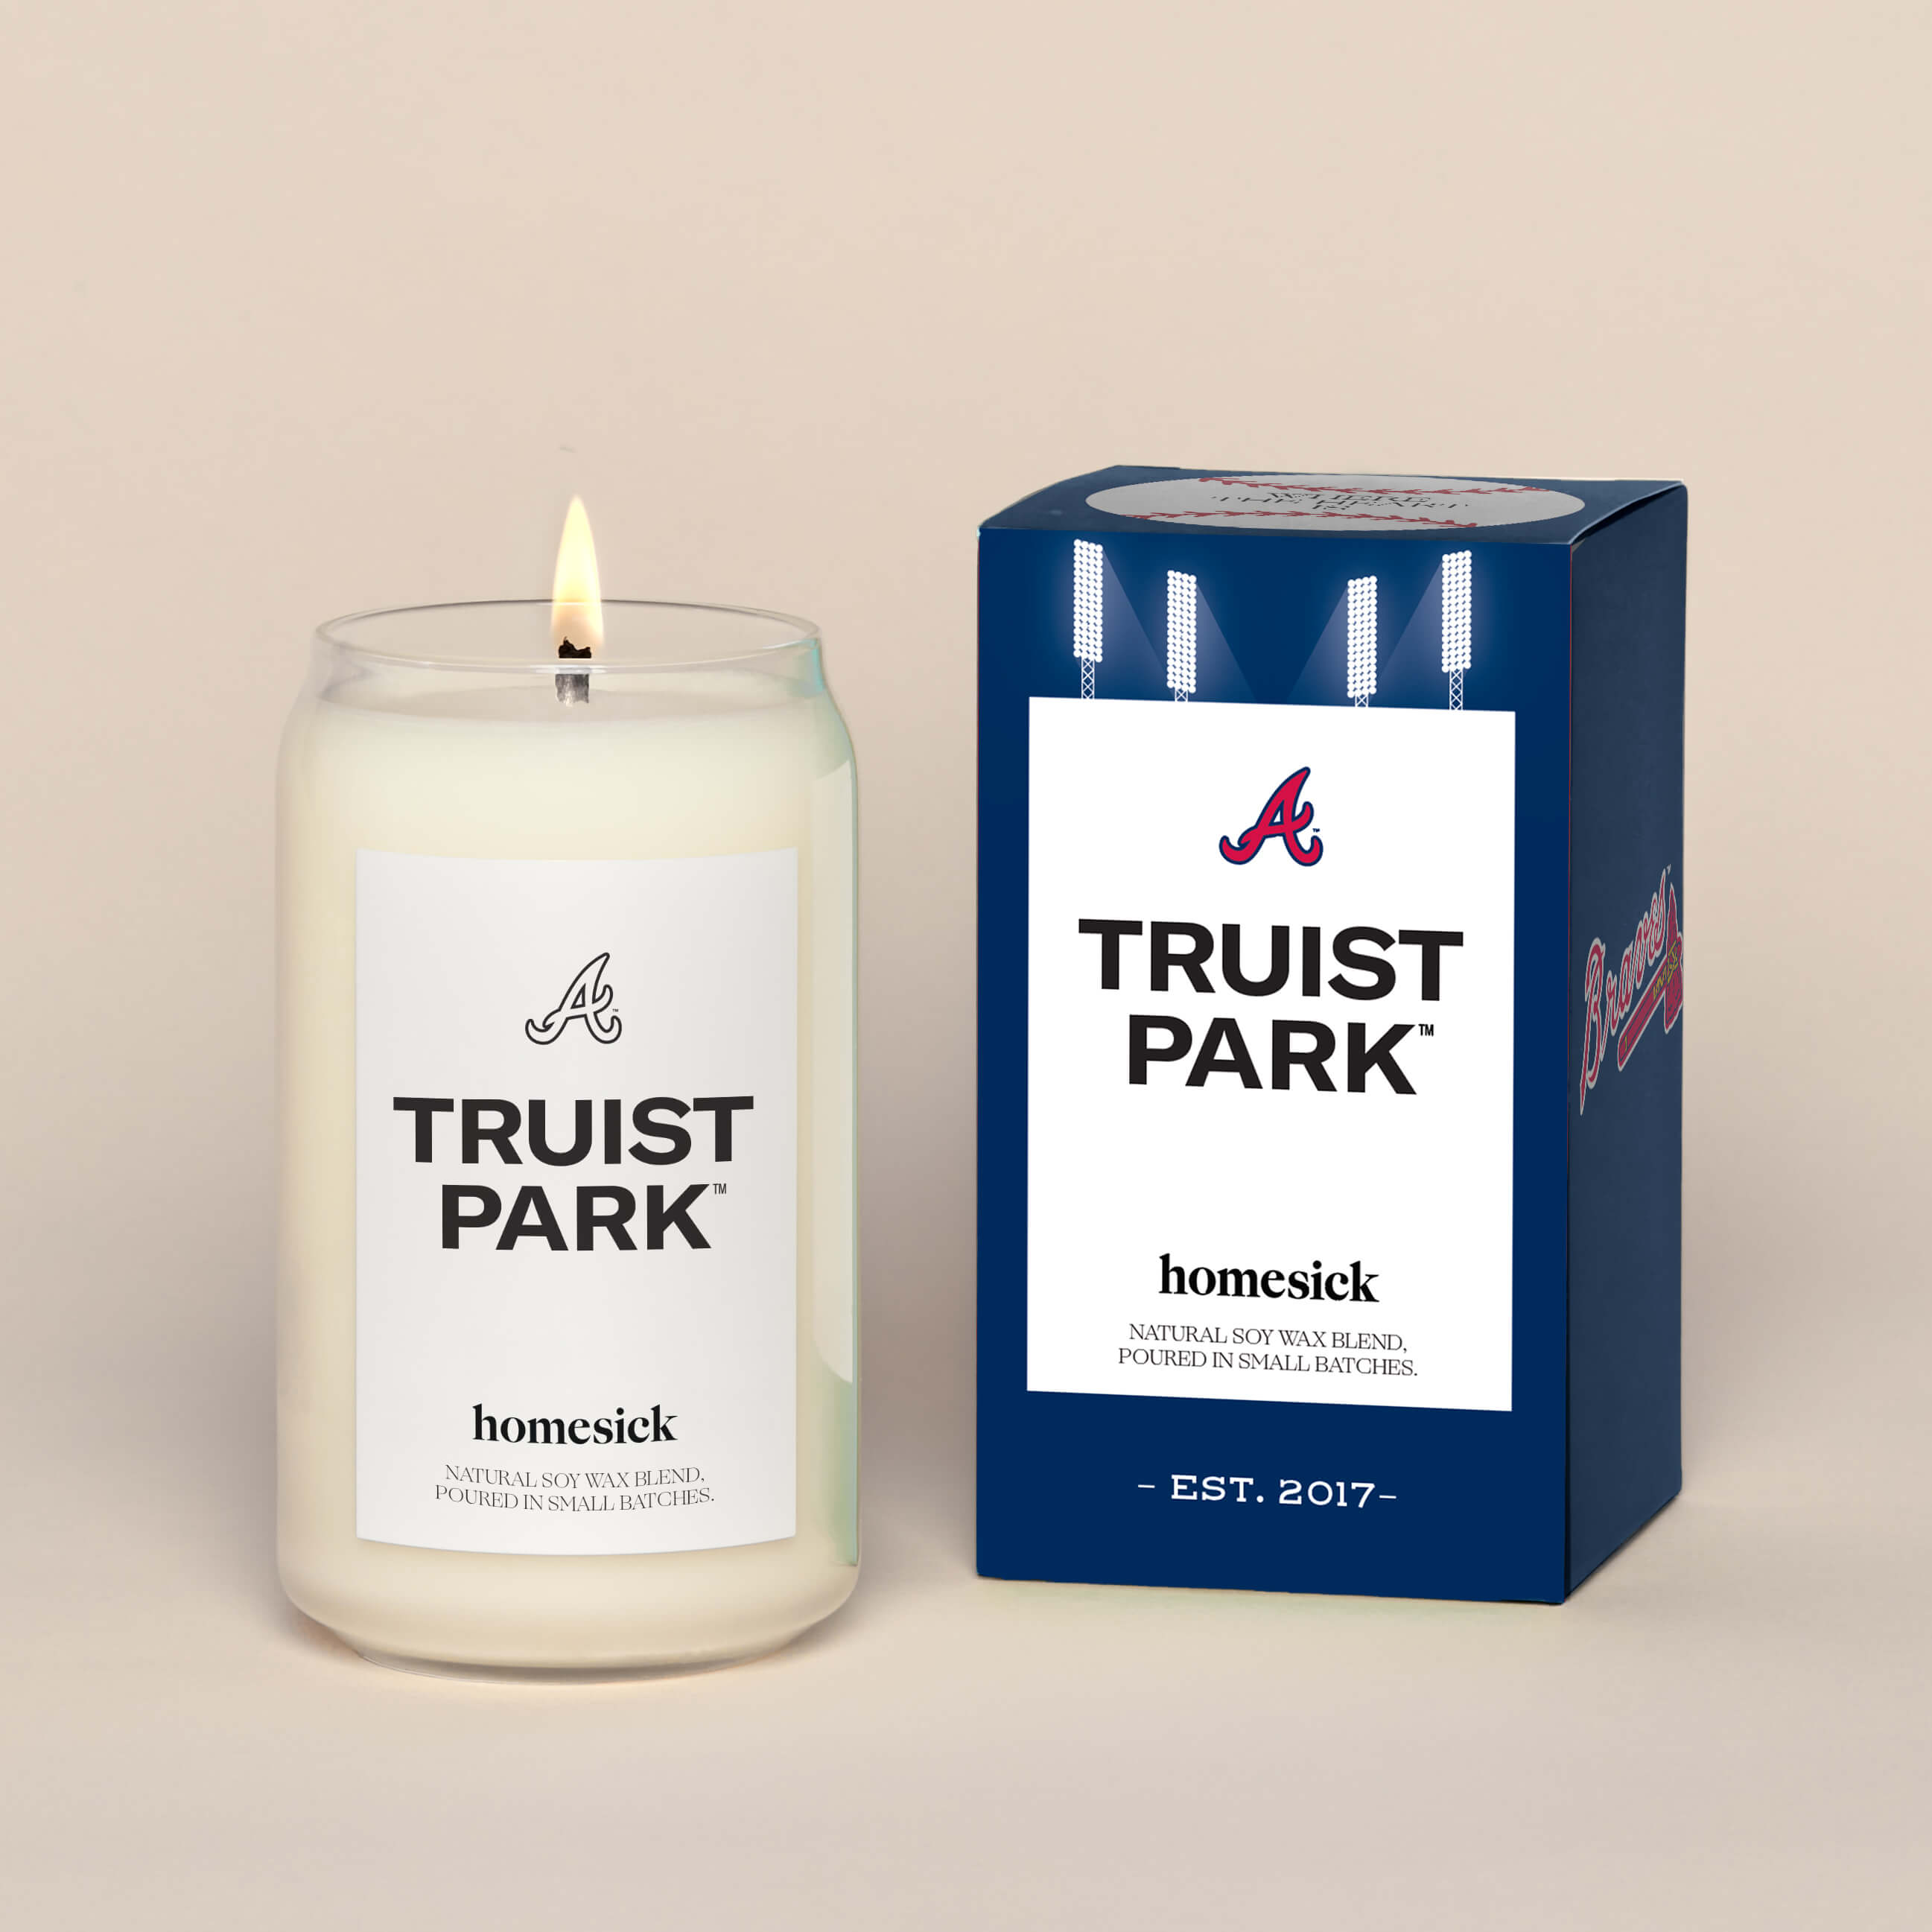 Homesick Truist Park Candle